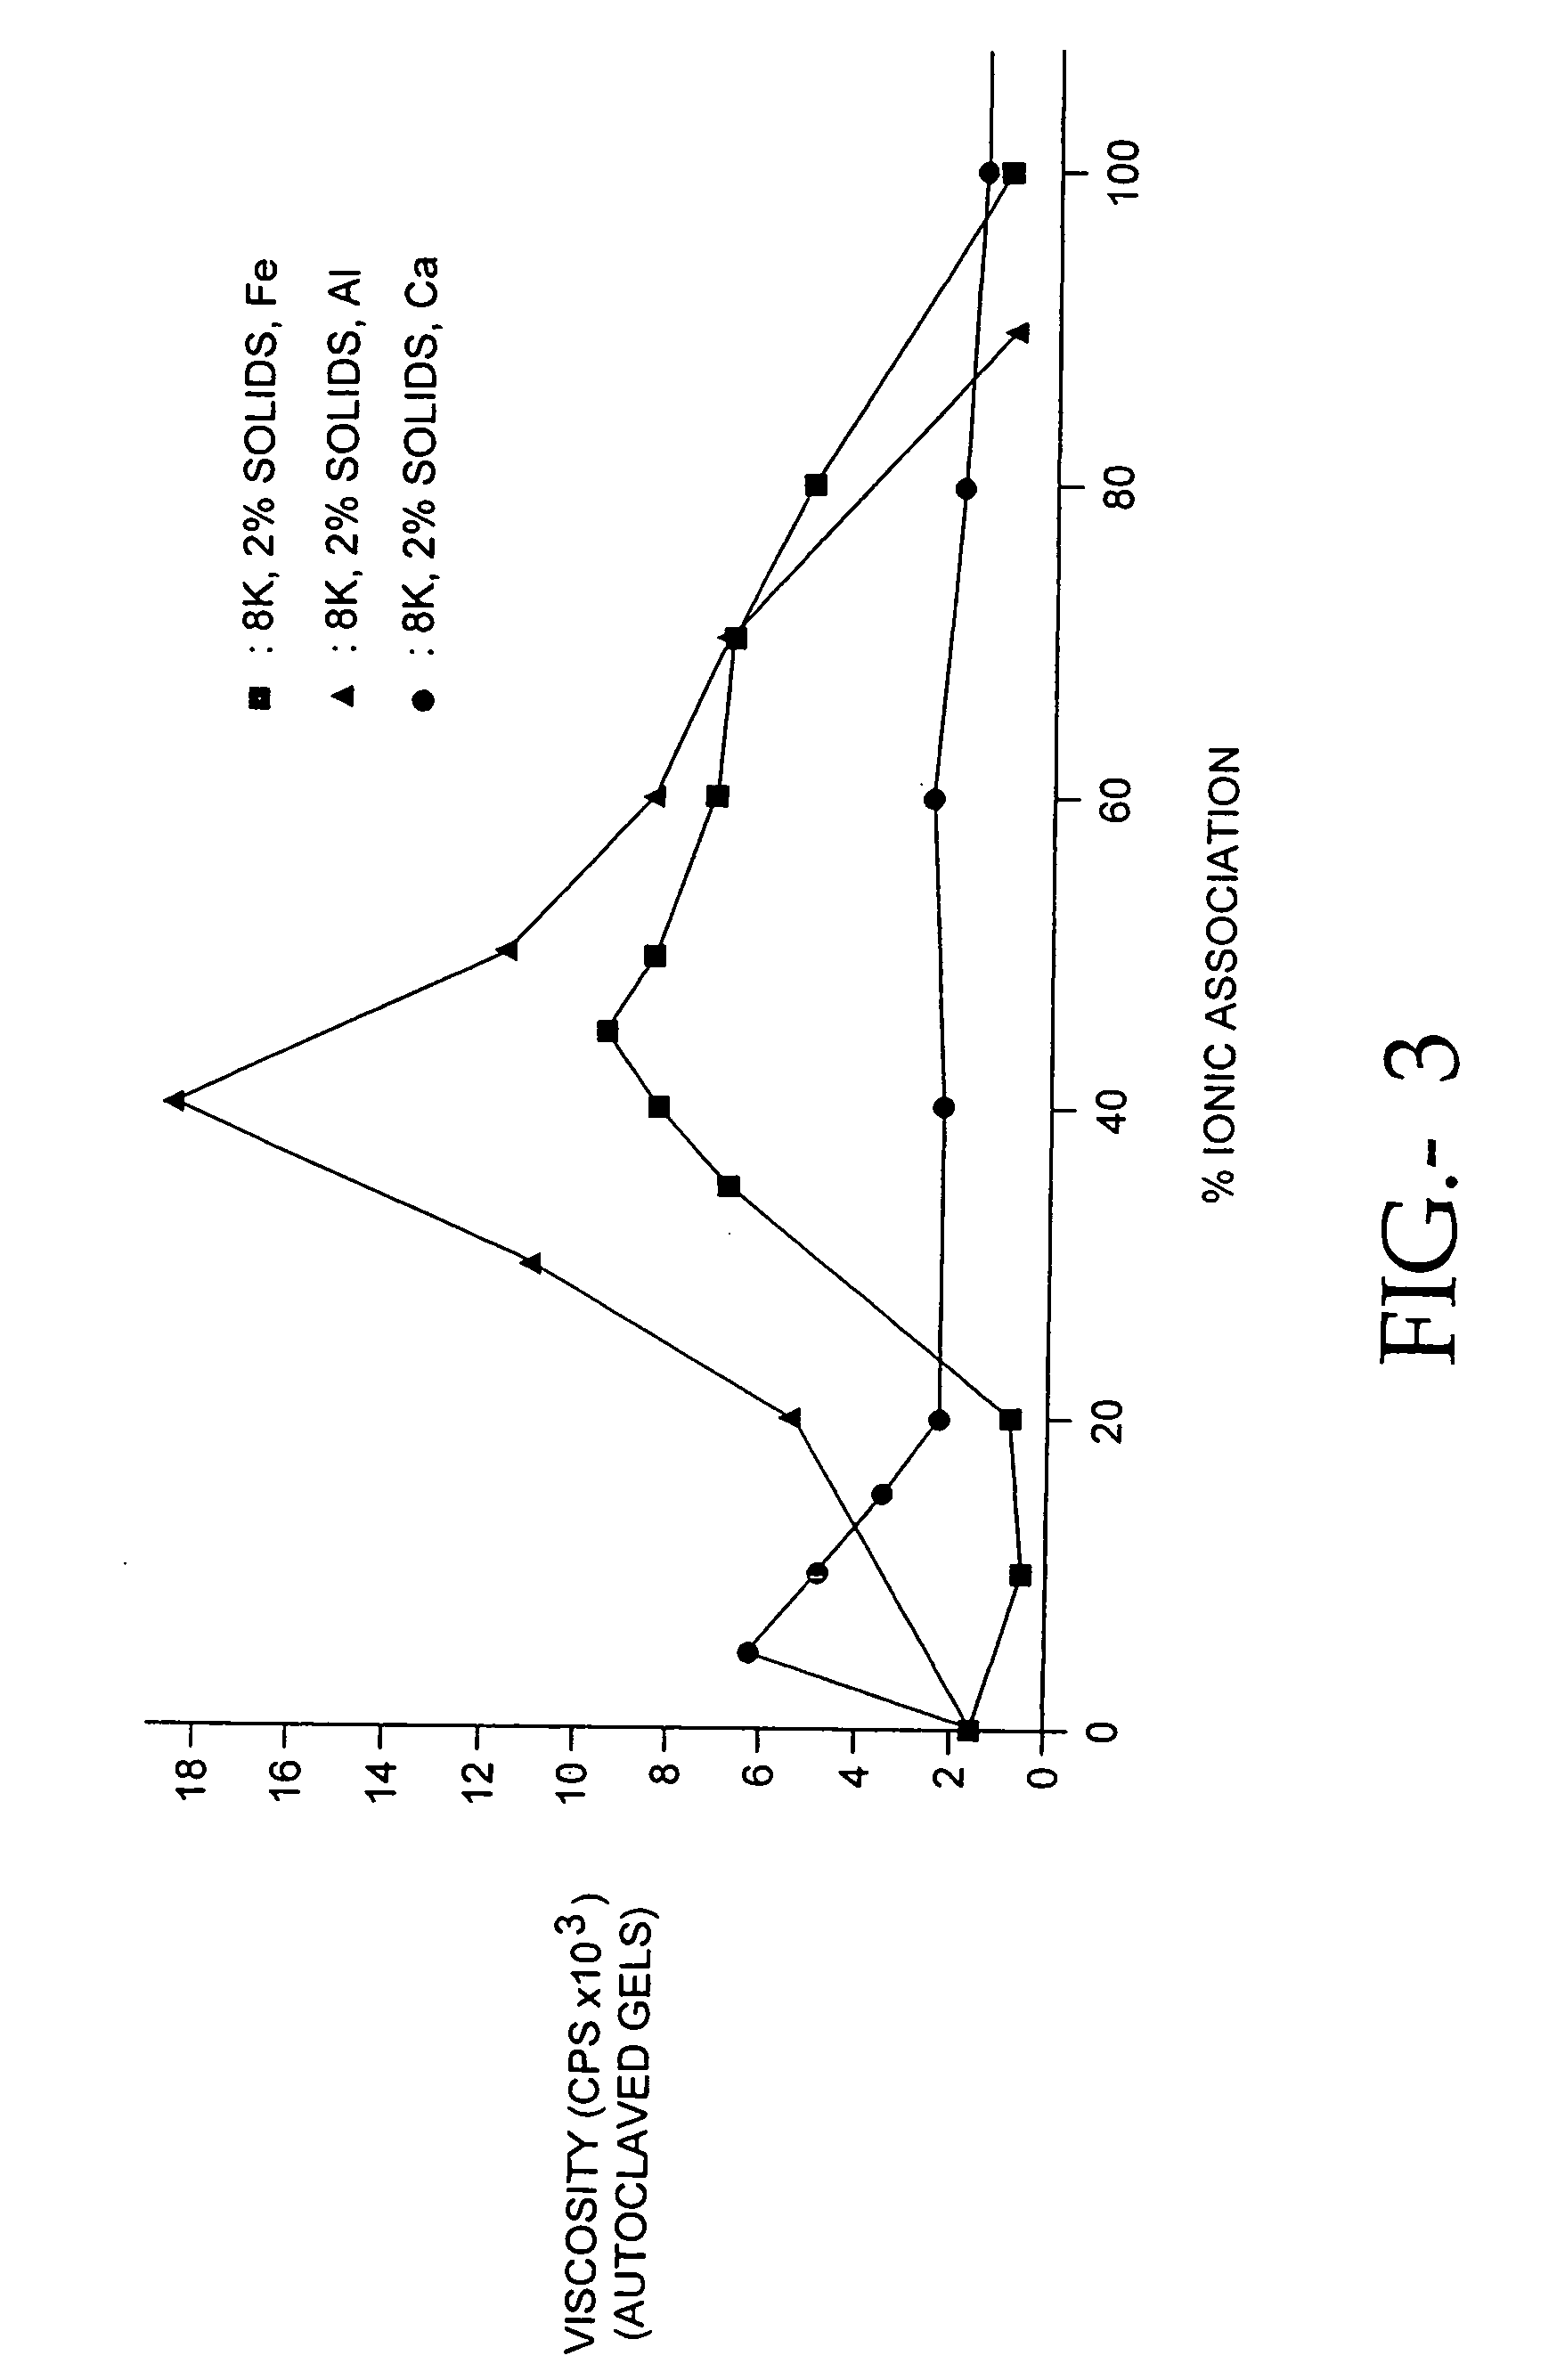 Compositions of polyacids and polyethers and methods for their use as dermal fillers